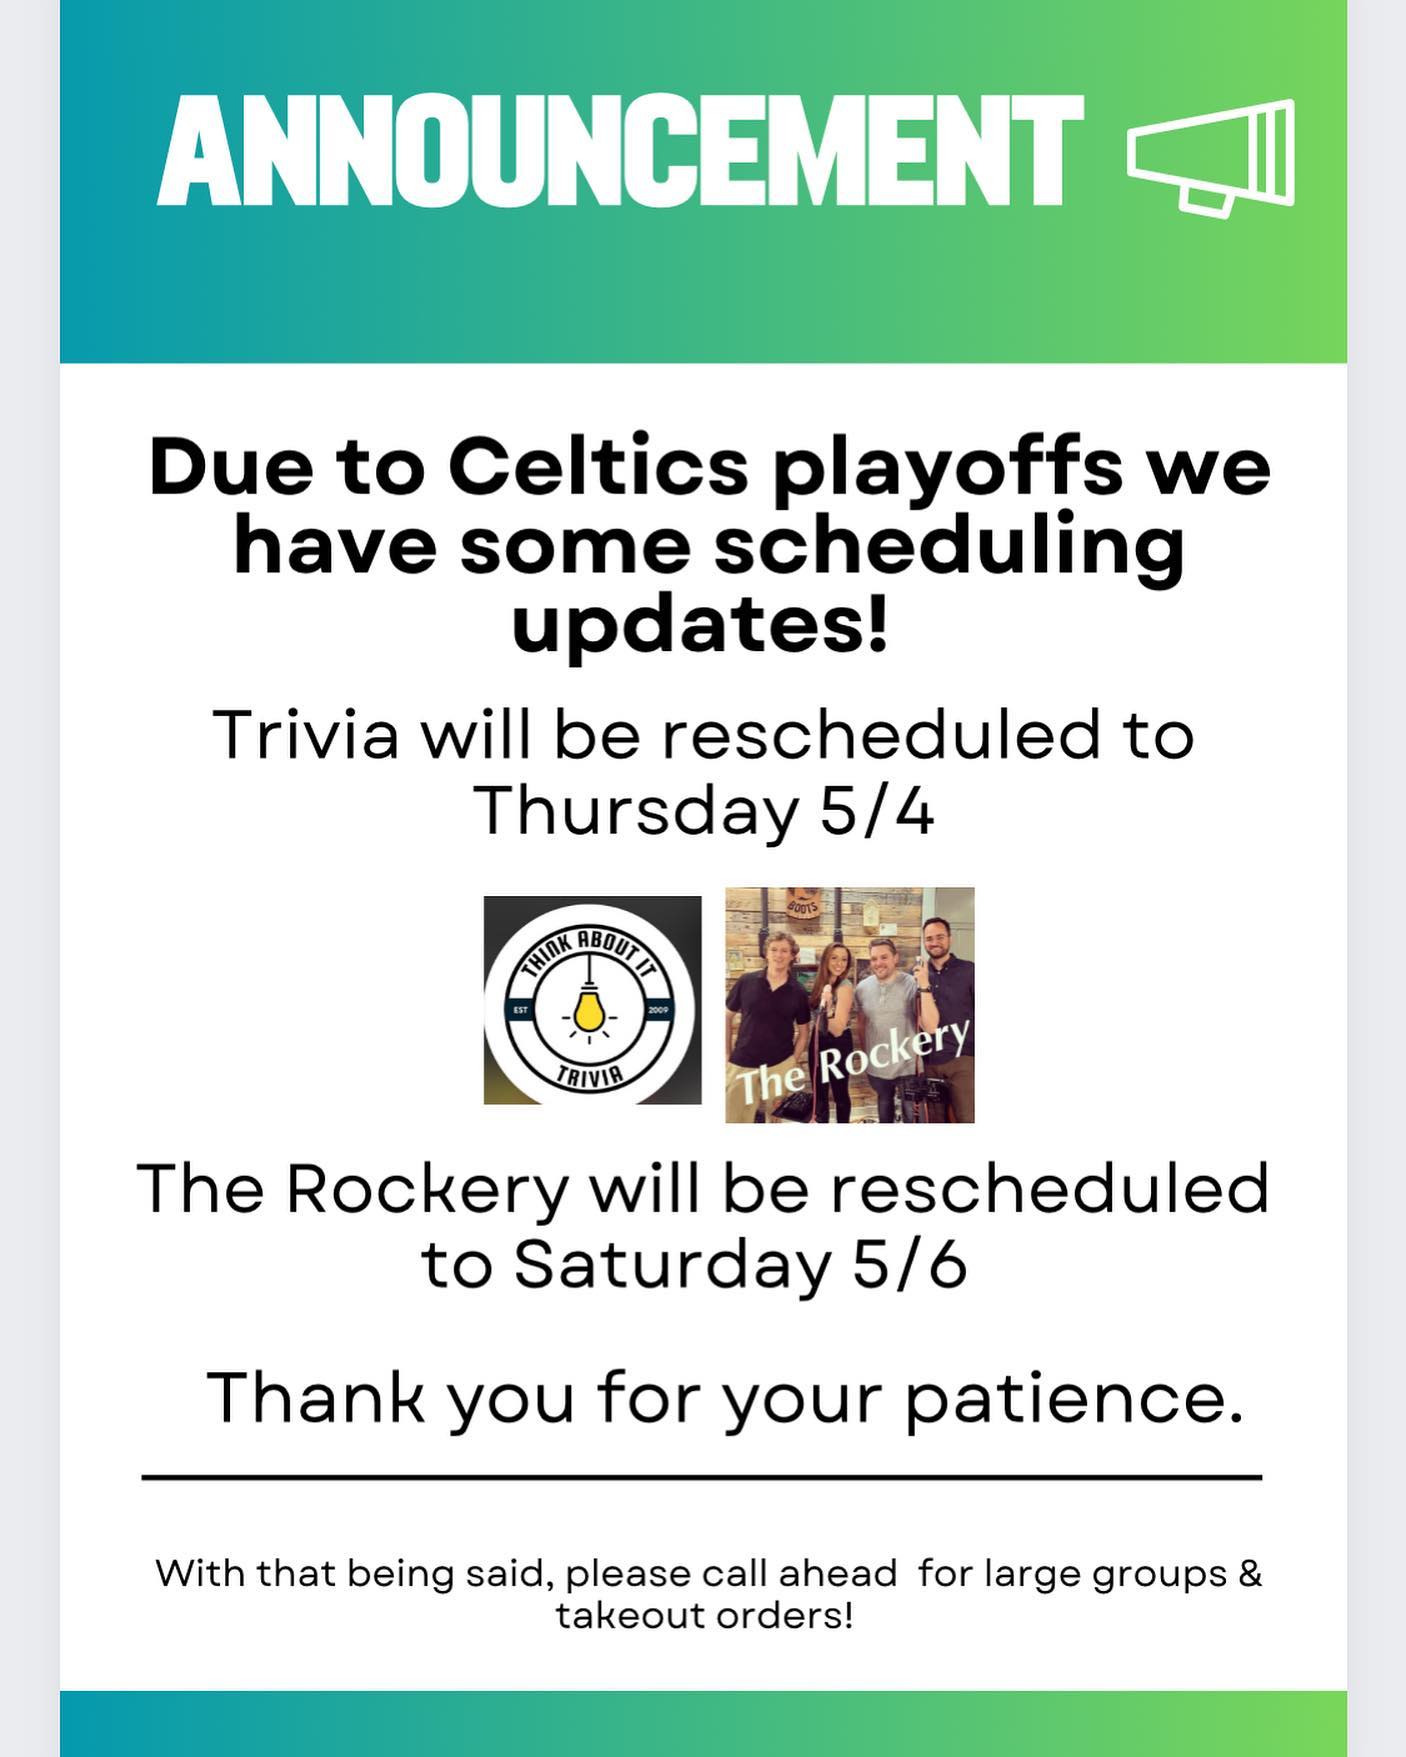 Happy Wednesday! Some updates on our events this week…
Trivia now Thursday 5/4!
The Rockery now Sat 5/6!Thank you for understanding & as always please call ahead with takeout or large groups!